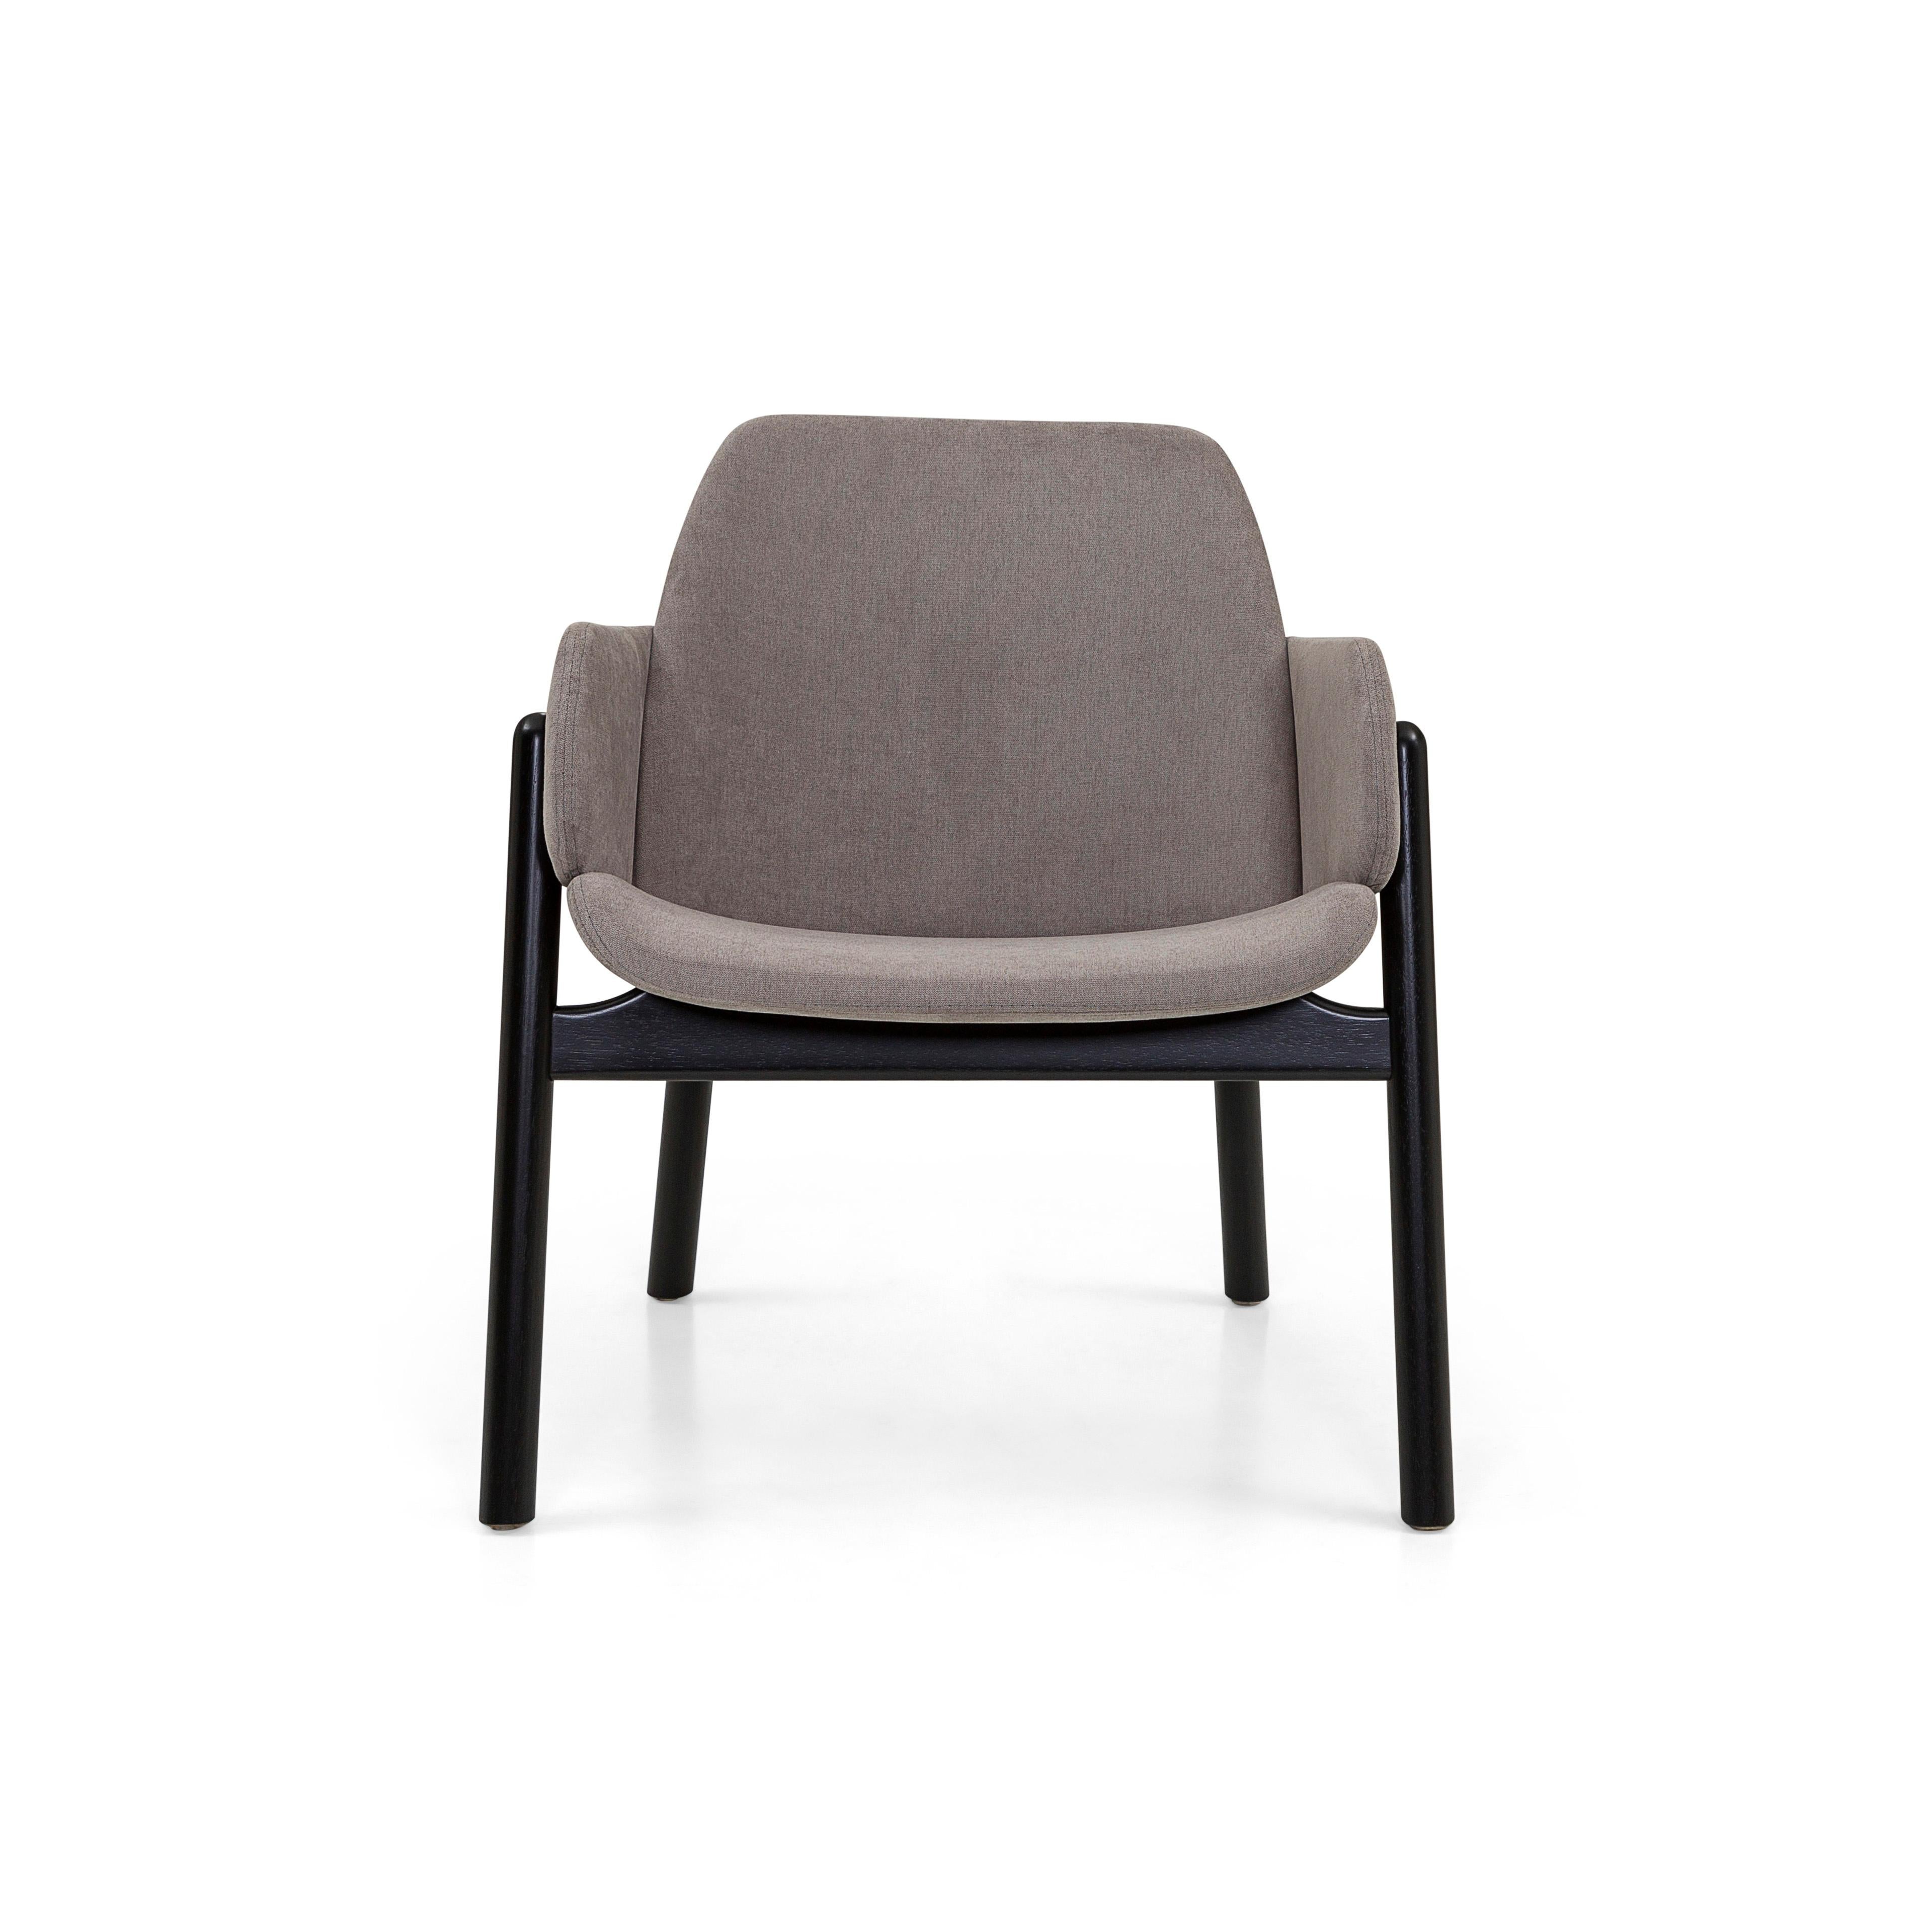 The above chair goes above and beyond in terms of design and comfortability. The combination of the grey fabric and the black painted frame allows you to mix the Above chair in rooms already established and rooms with a new design. The seat, back,